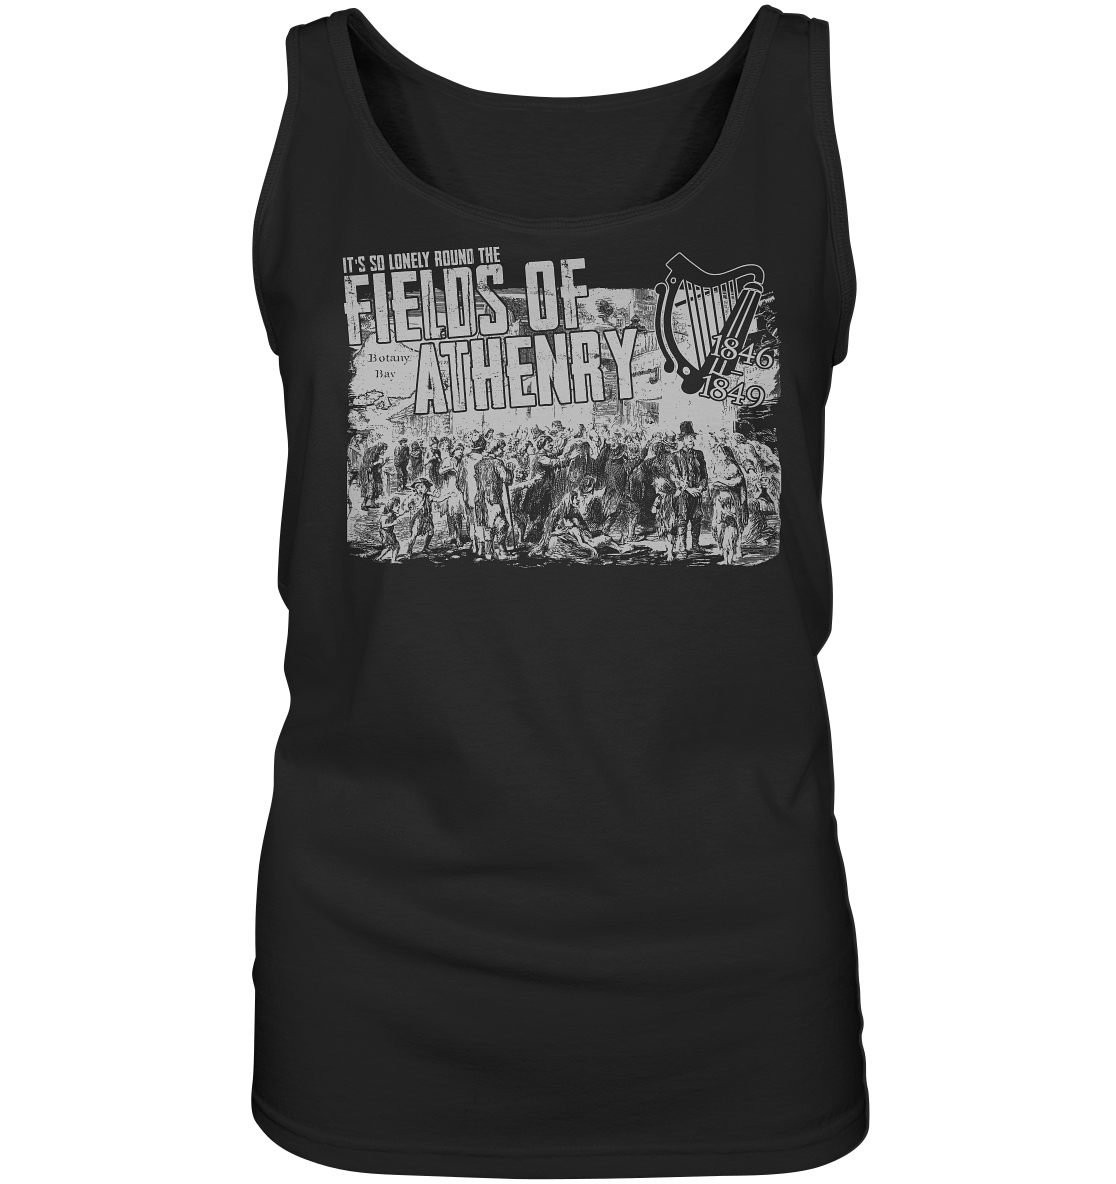 "Fields Of Athenry" - Ladies Tank-Top